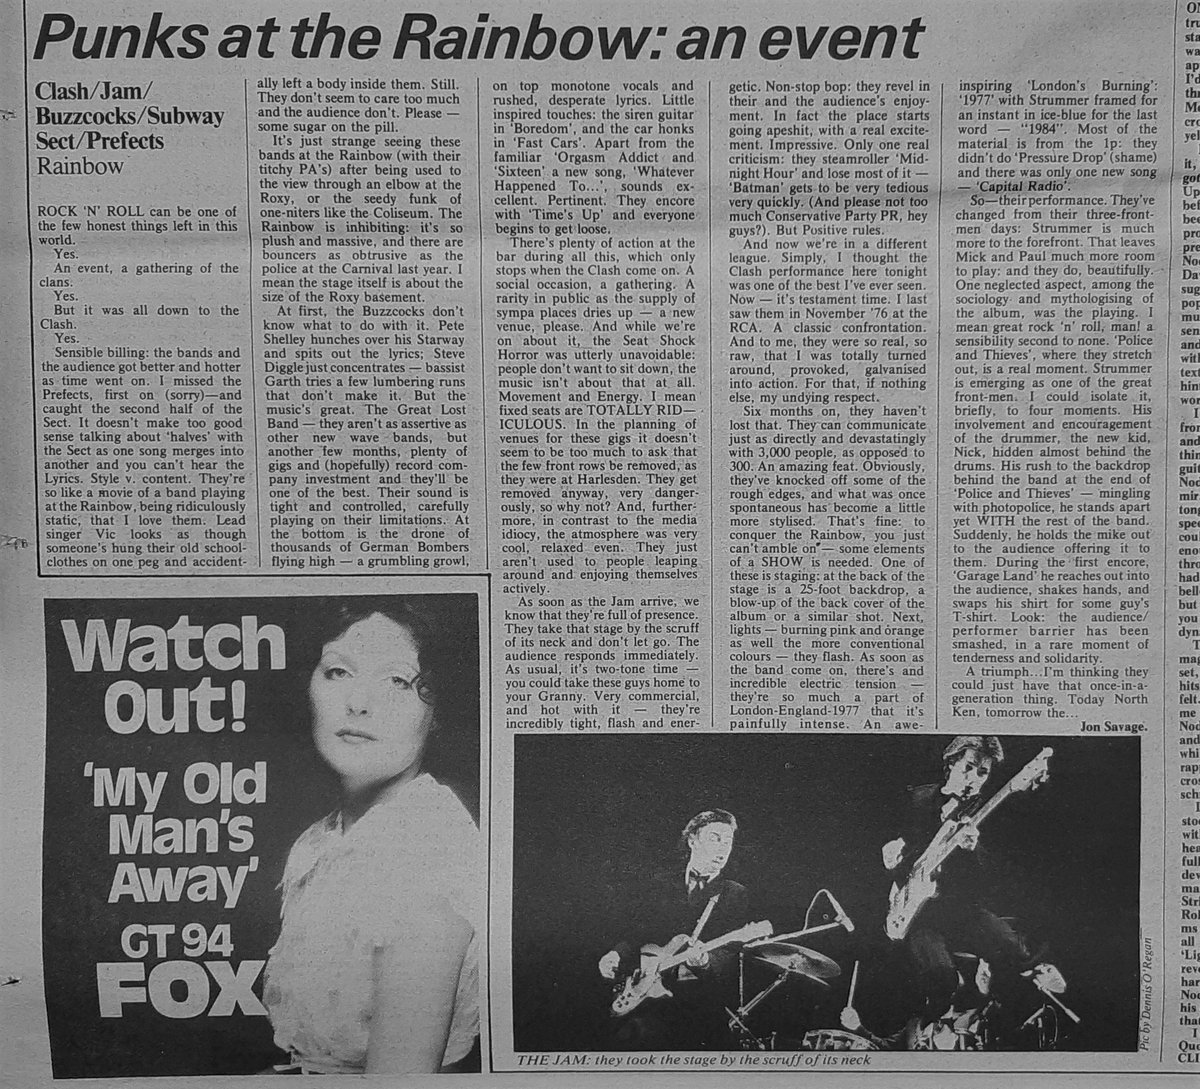 21st, May 1977 The Clash, The Jam, Buzzcocks, Subway Sect and The Prefects' gig at the Rainbow reviewed by Jon Savage. 'Rock 'N' Roll can be one of the few honest things left in this world.' @JonSavage1966 @TheClash @LongLiveTheJam @Buzzcocks @vic_subwaysect @_Nightingales